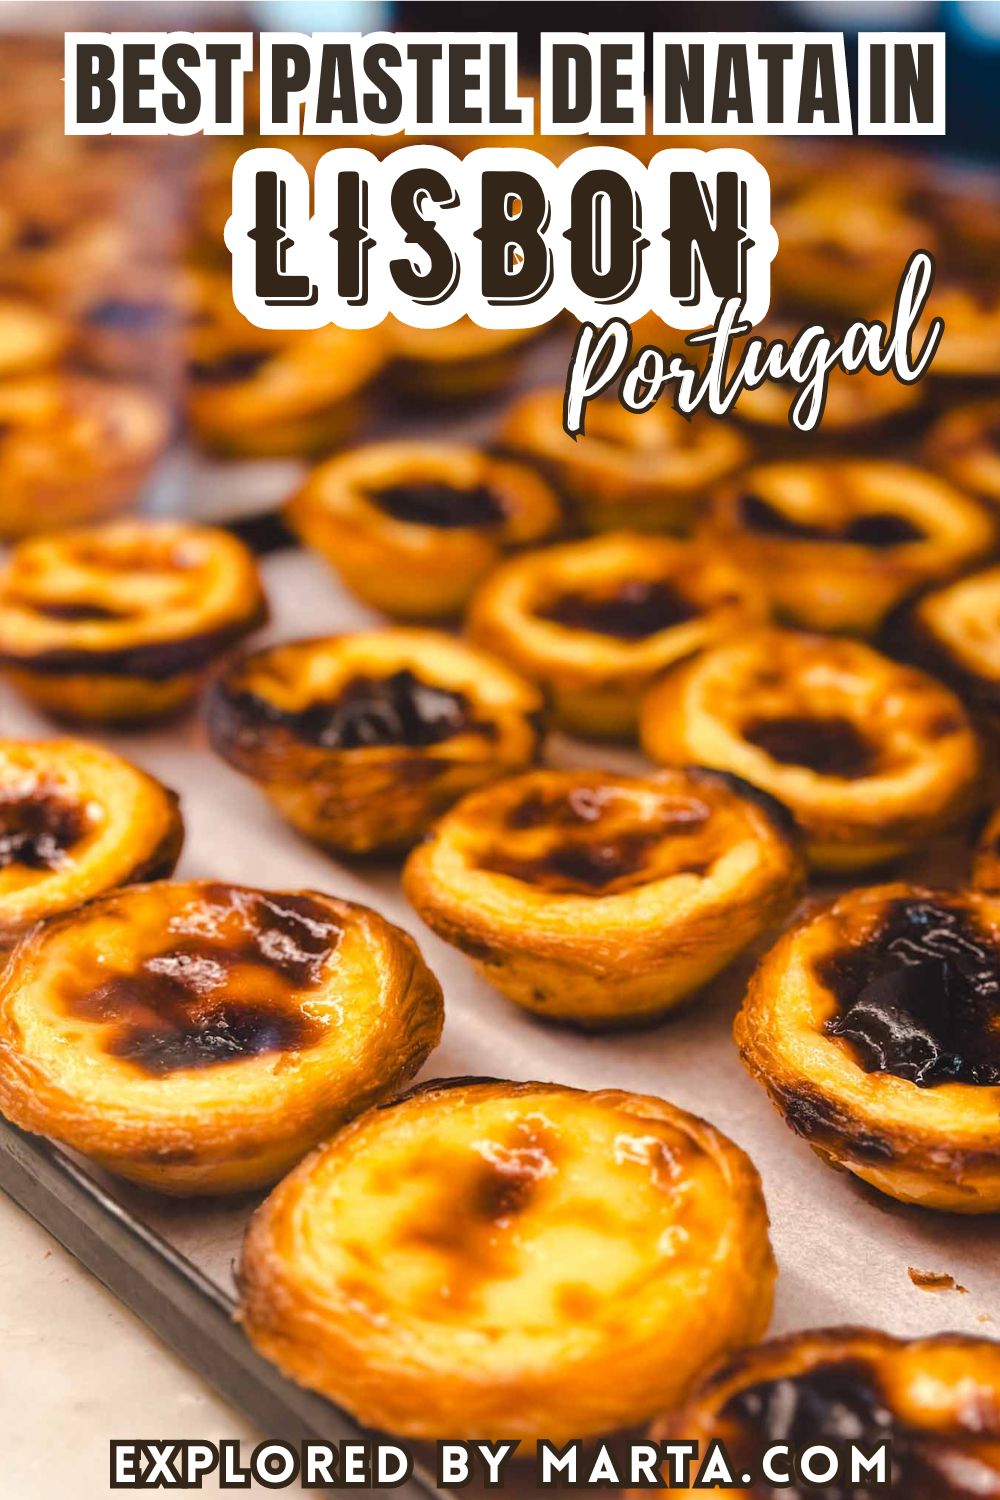 Pastel de nata in Lisbon, Portugal - best cafes and restaurants to try the traditional Portuguese egg tart